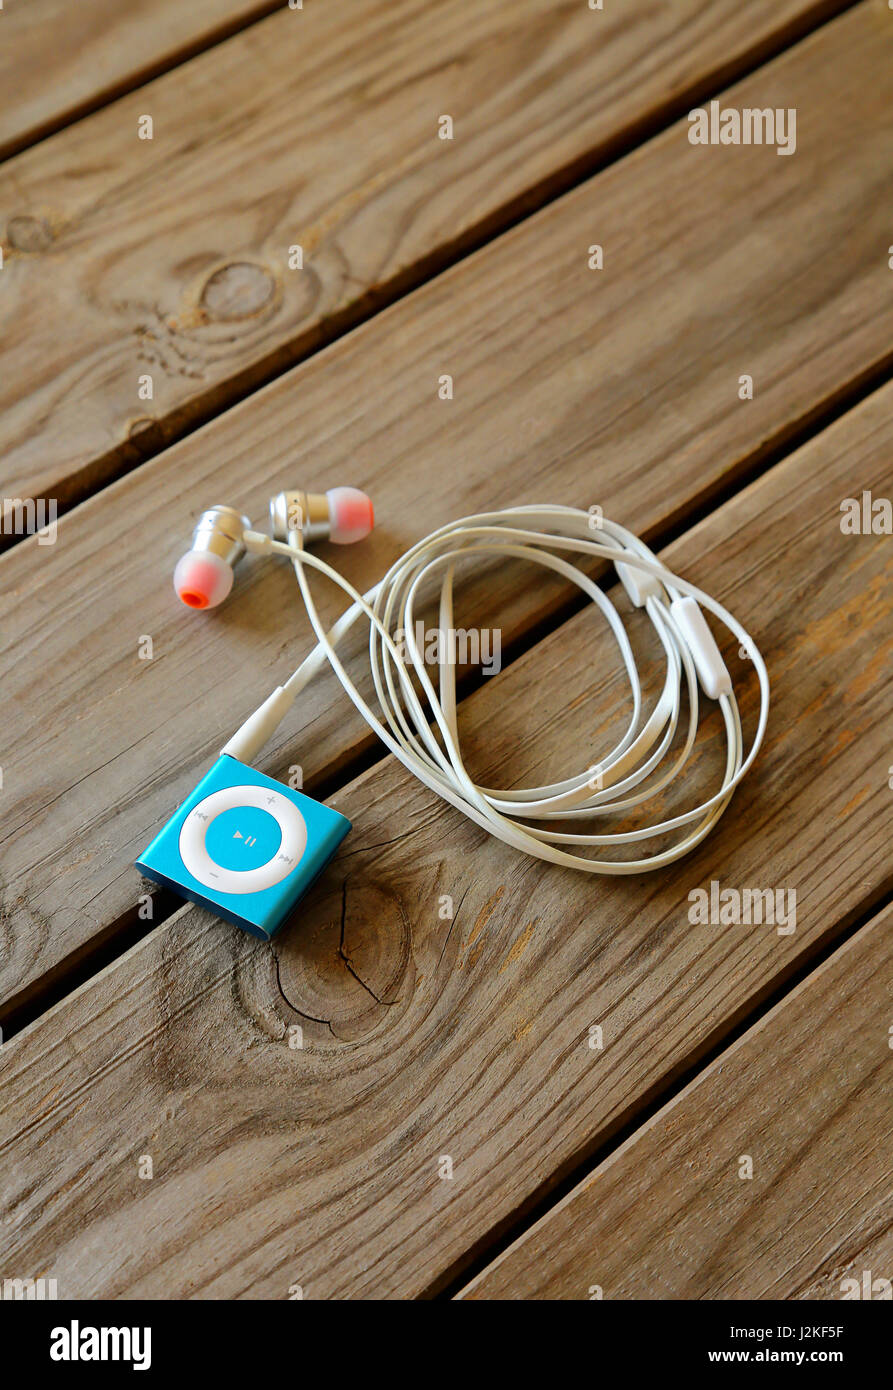 Music player on wooden desk Stock Photo